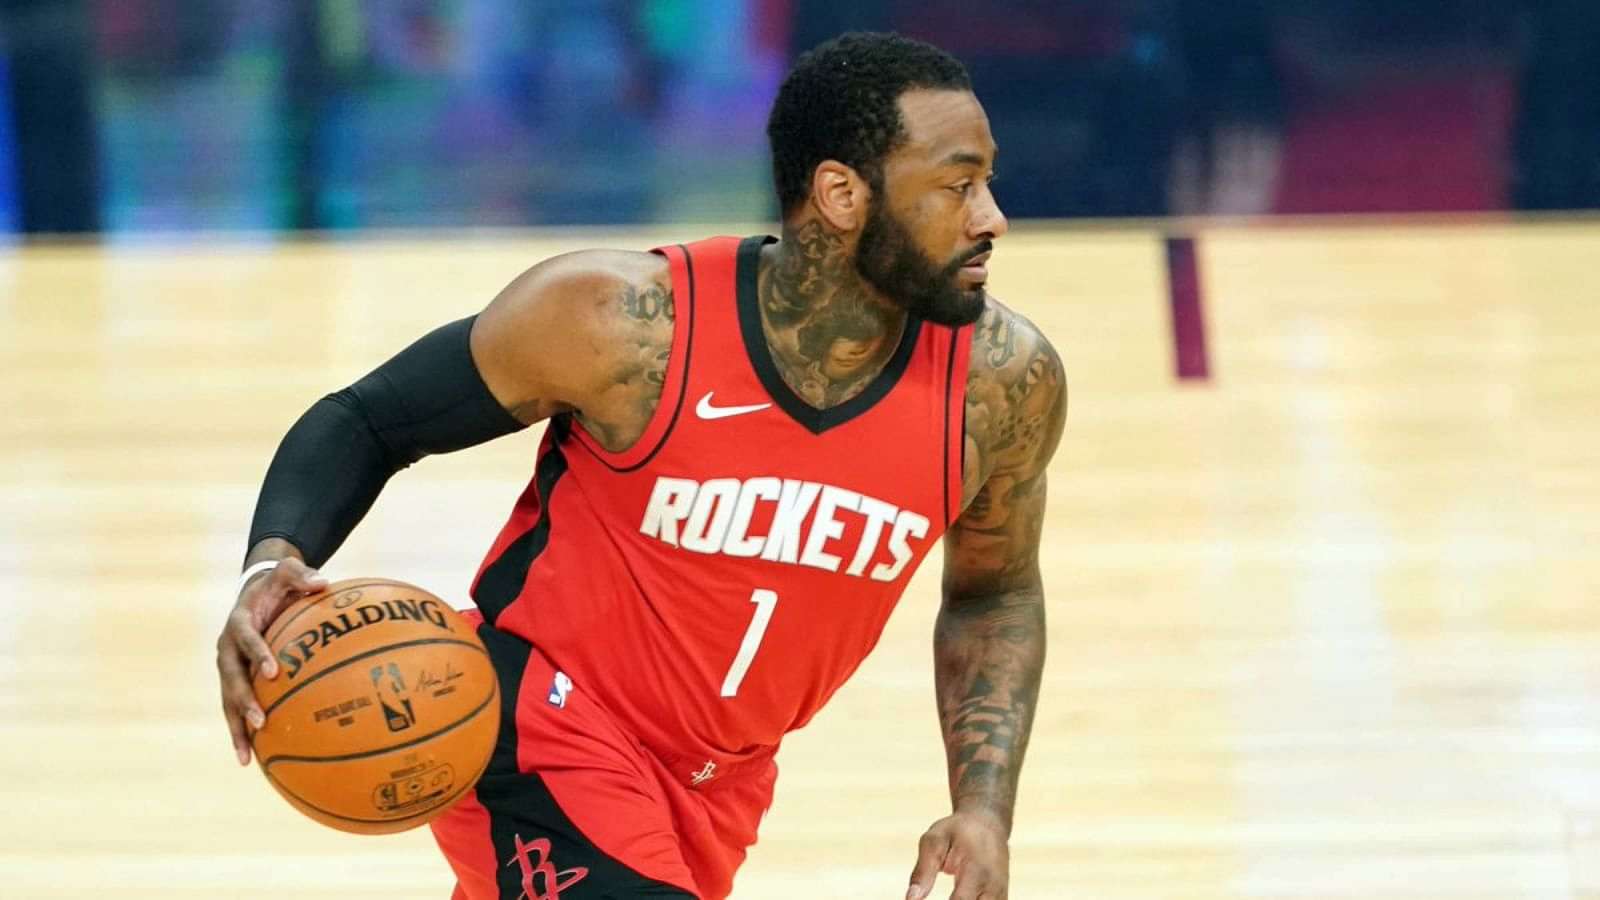 “John Wall has made $3.1 million PER GAME in last 3 seasons .. Why would he do that!?”: Rockets guard sets NBA Twitter on fire after opting in for his $47.4M player option